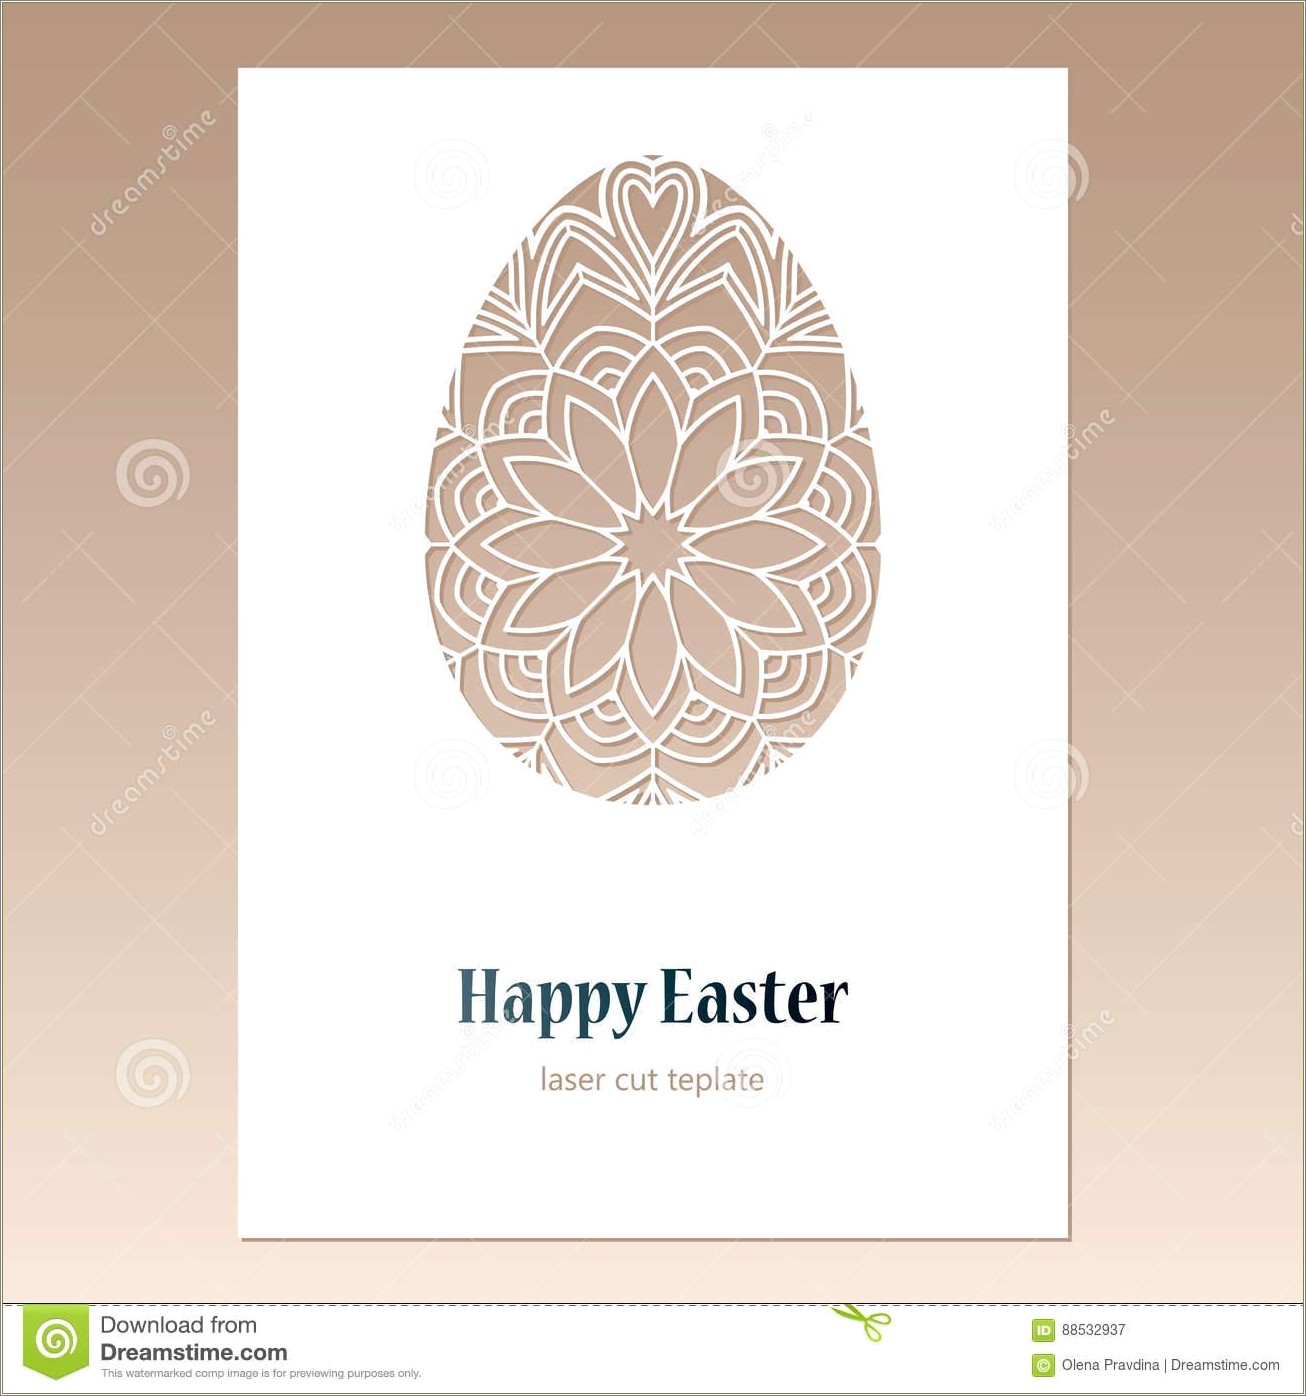 Free Template For Laser Cut Easter Card